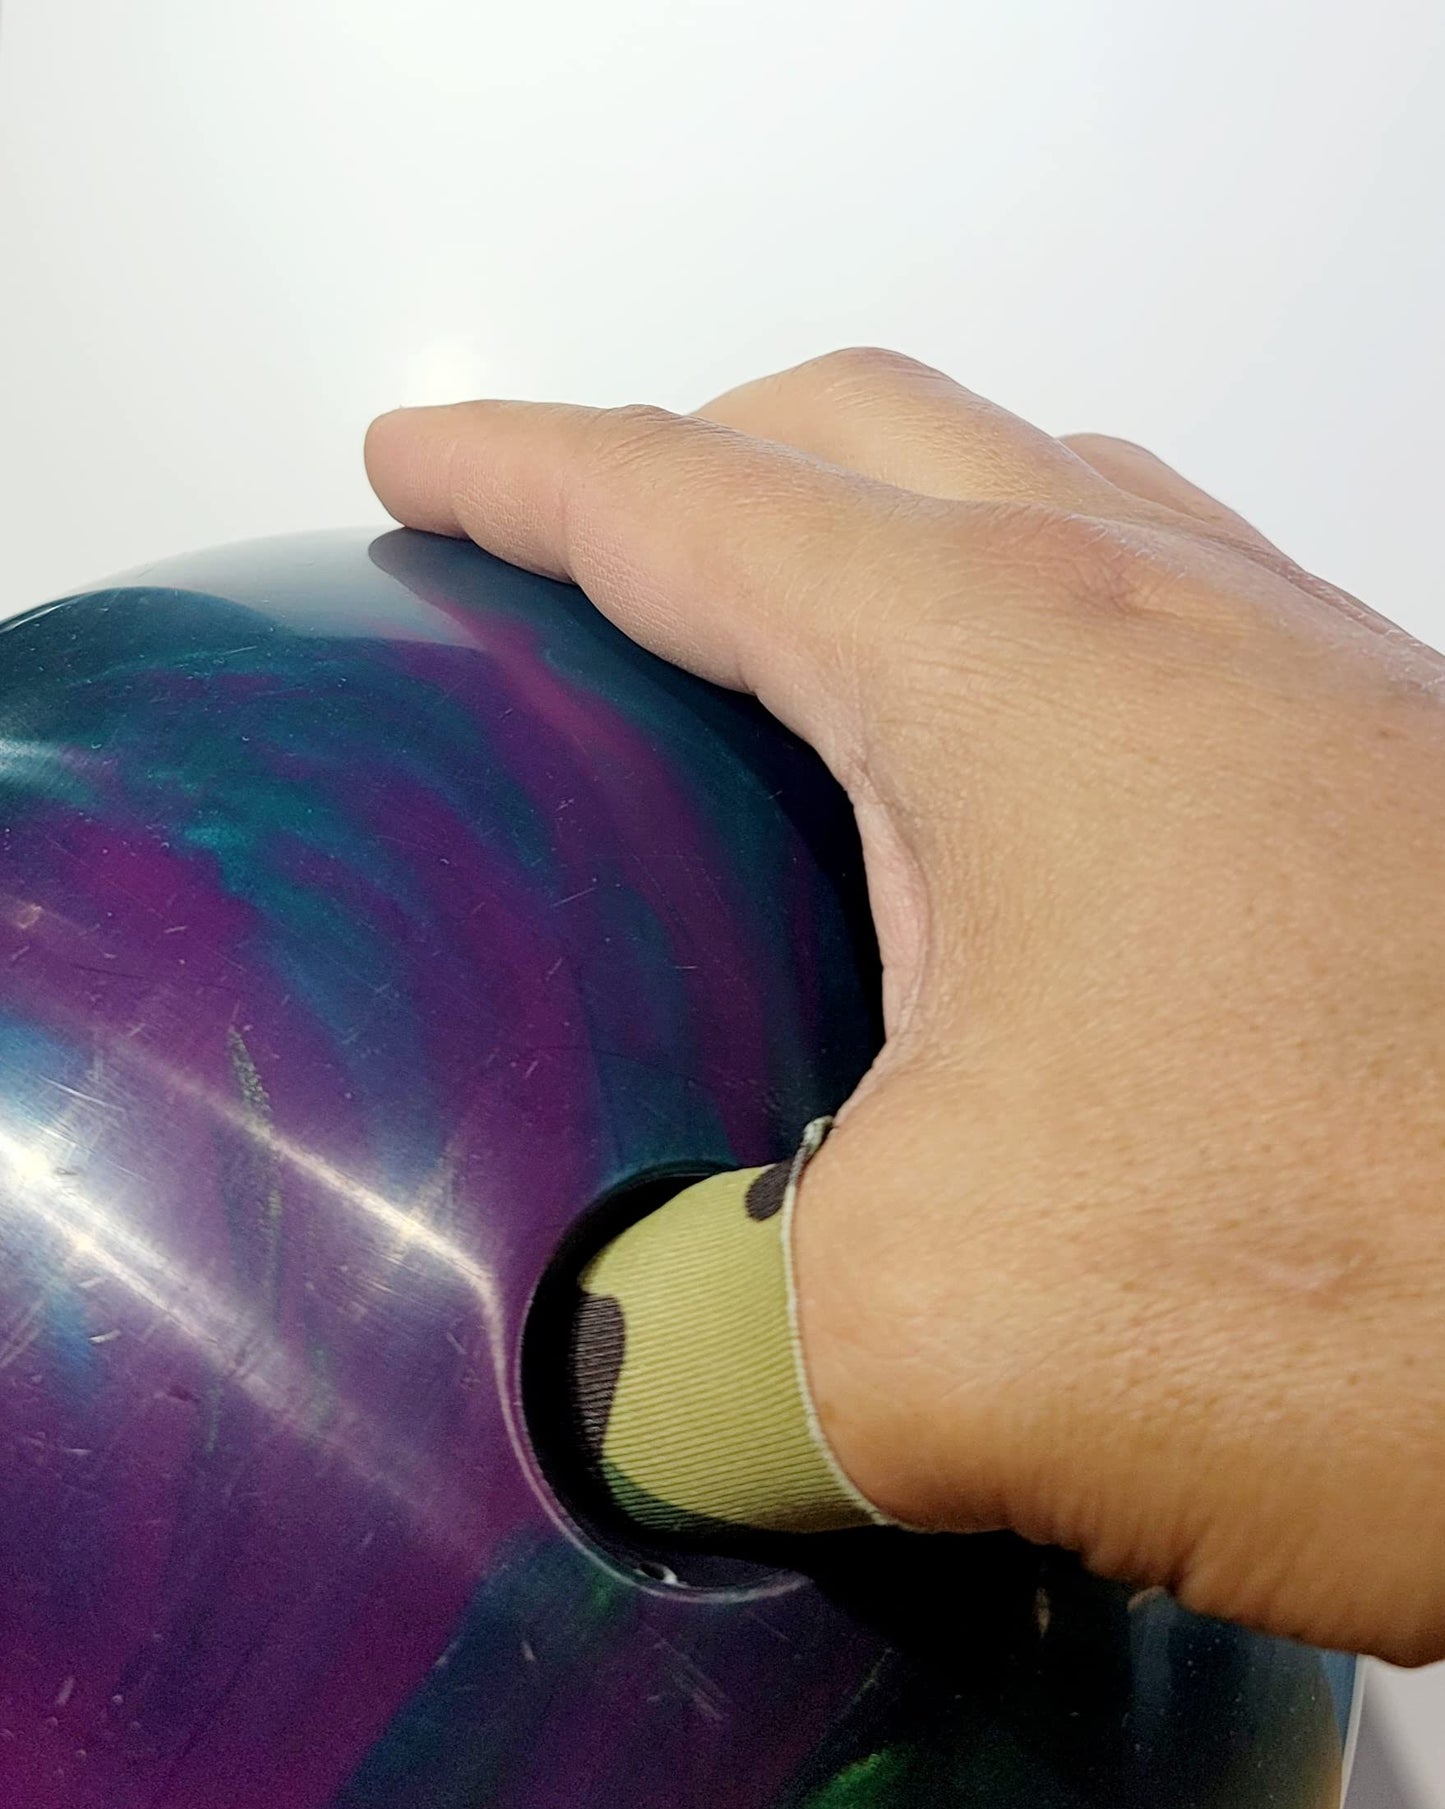 Bowling Thumb Sock - from The Makers of The Original Thumb Sock